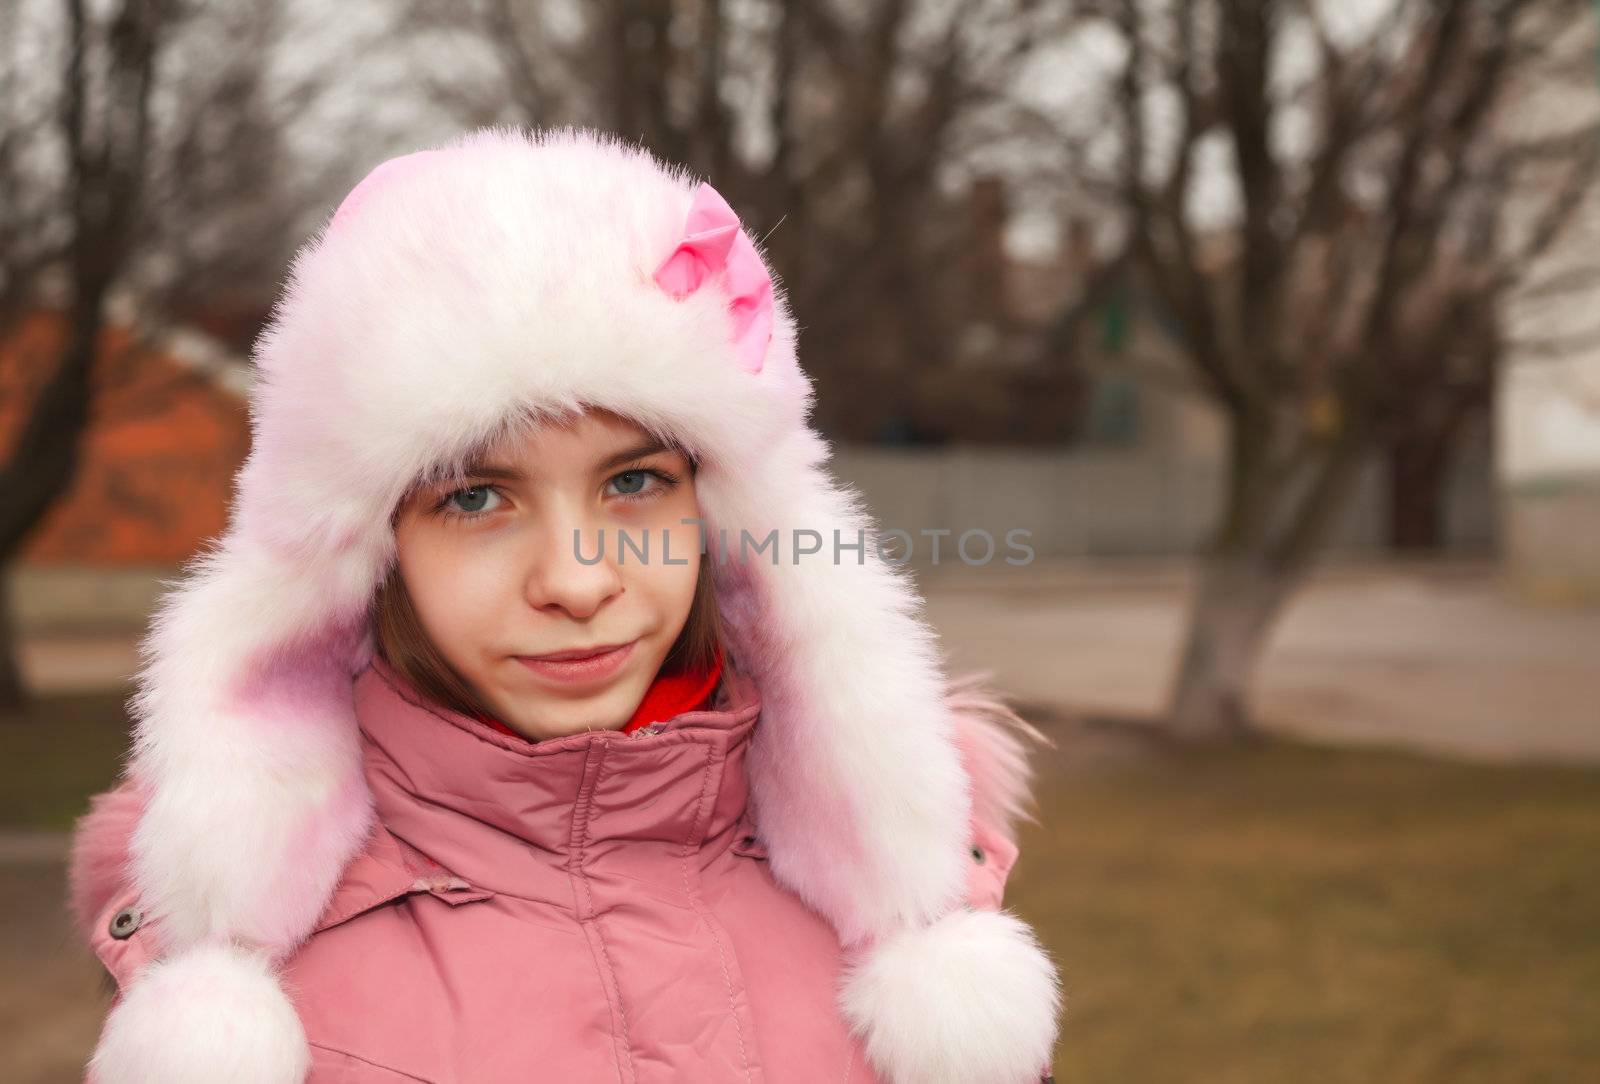 Teen girl staying outdoors at winter time